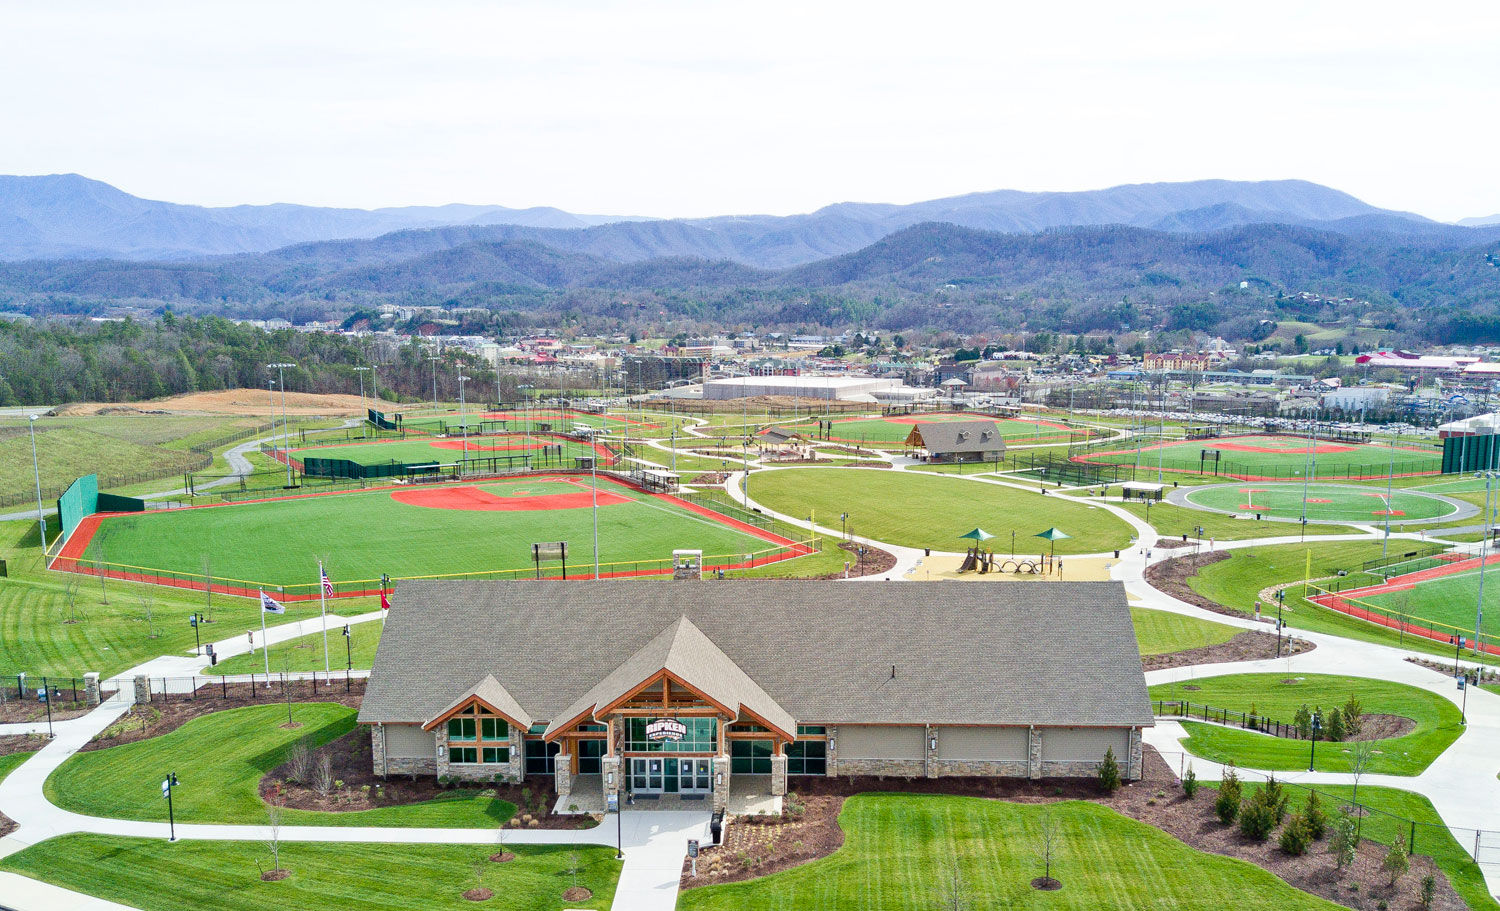 The third and most recent addition to The Ripken Experience family, in Pigeon Forge, Tennessee. (Courtesy: Ripken Baseball)